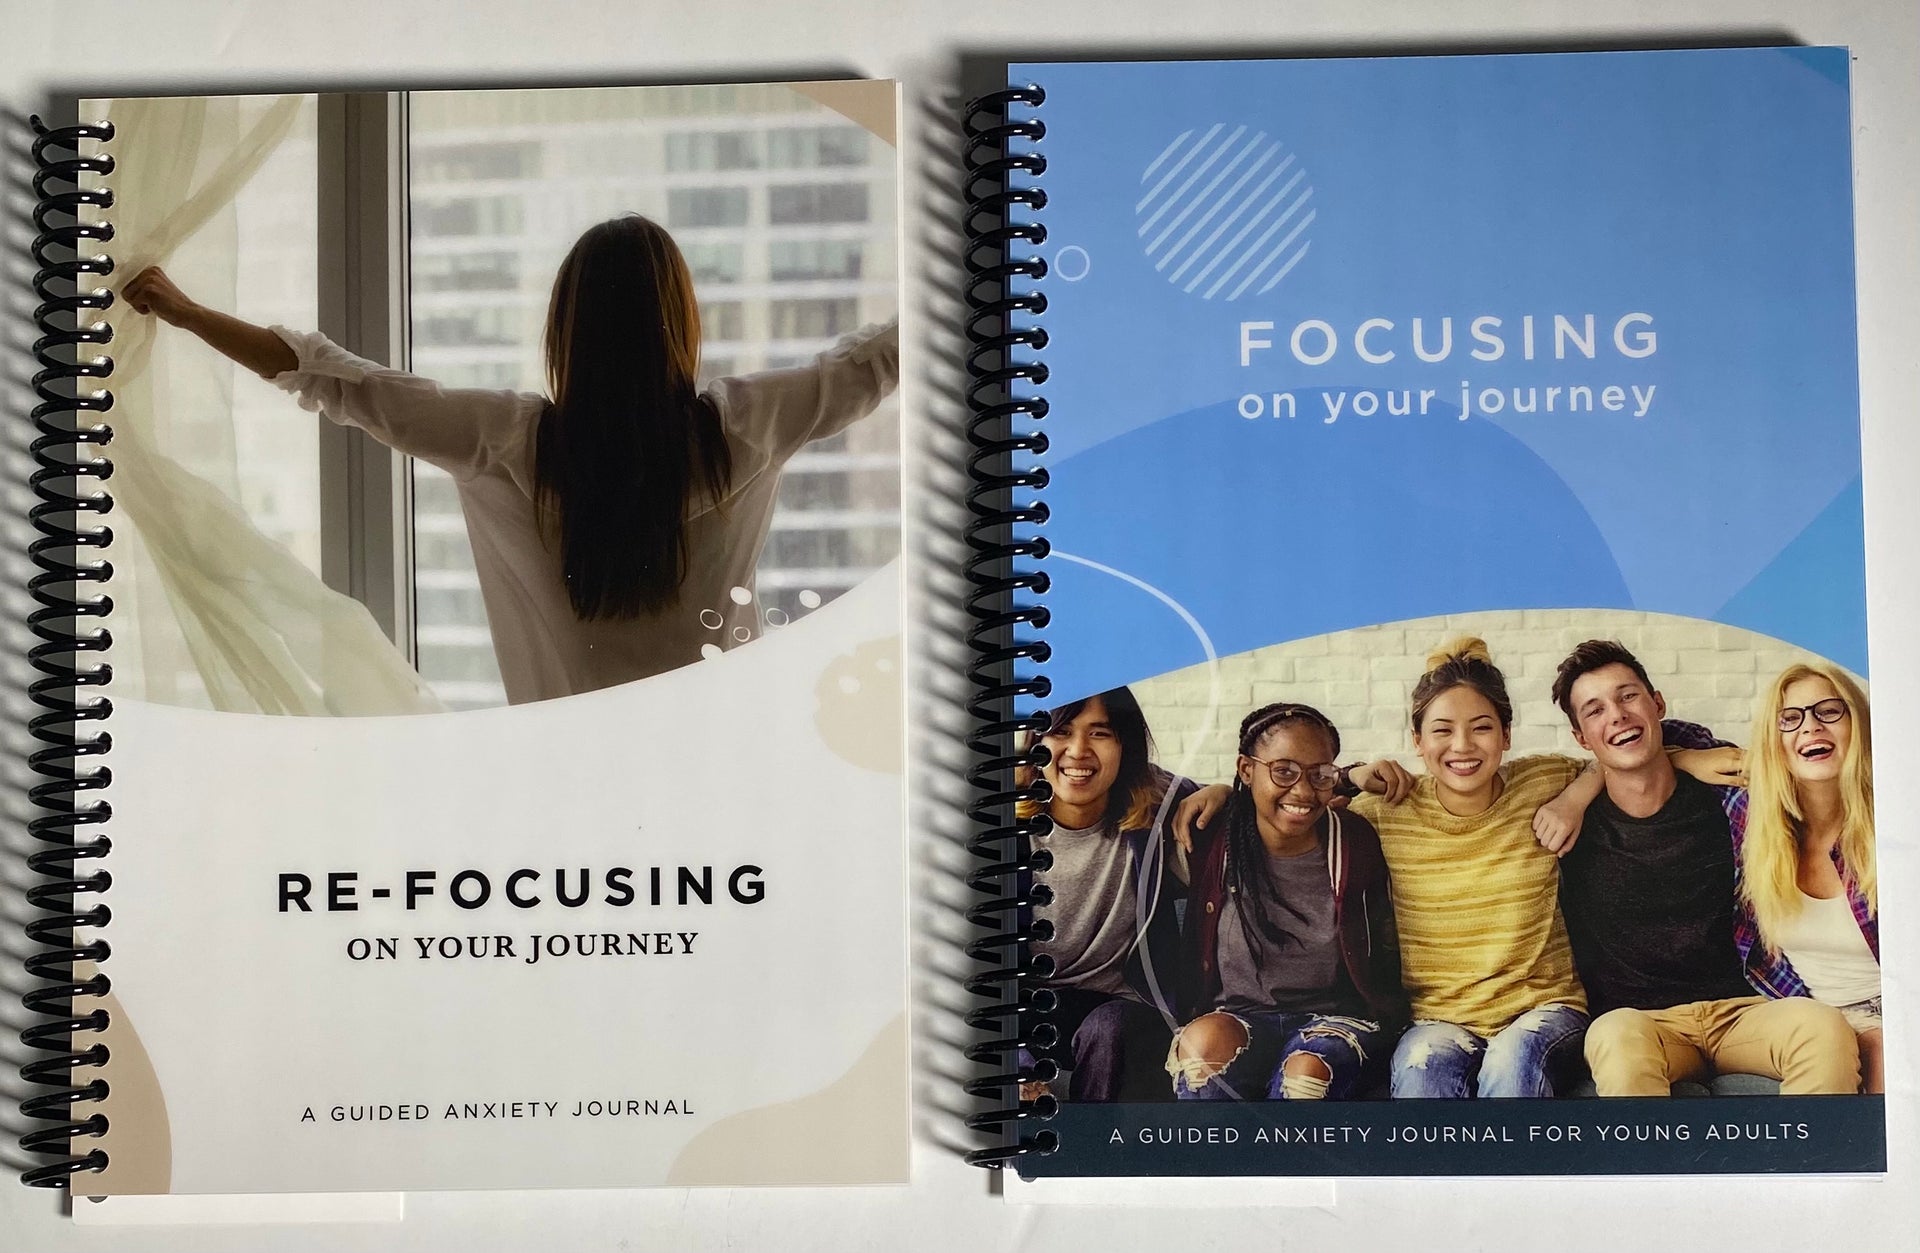 RE-FOCUS THE CREATIVE OFFICE, Focusing on your Journey: A Guided Anxiety Journal for Young Adults